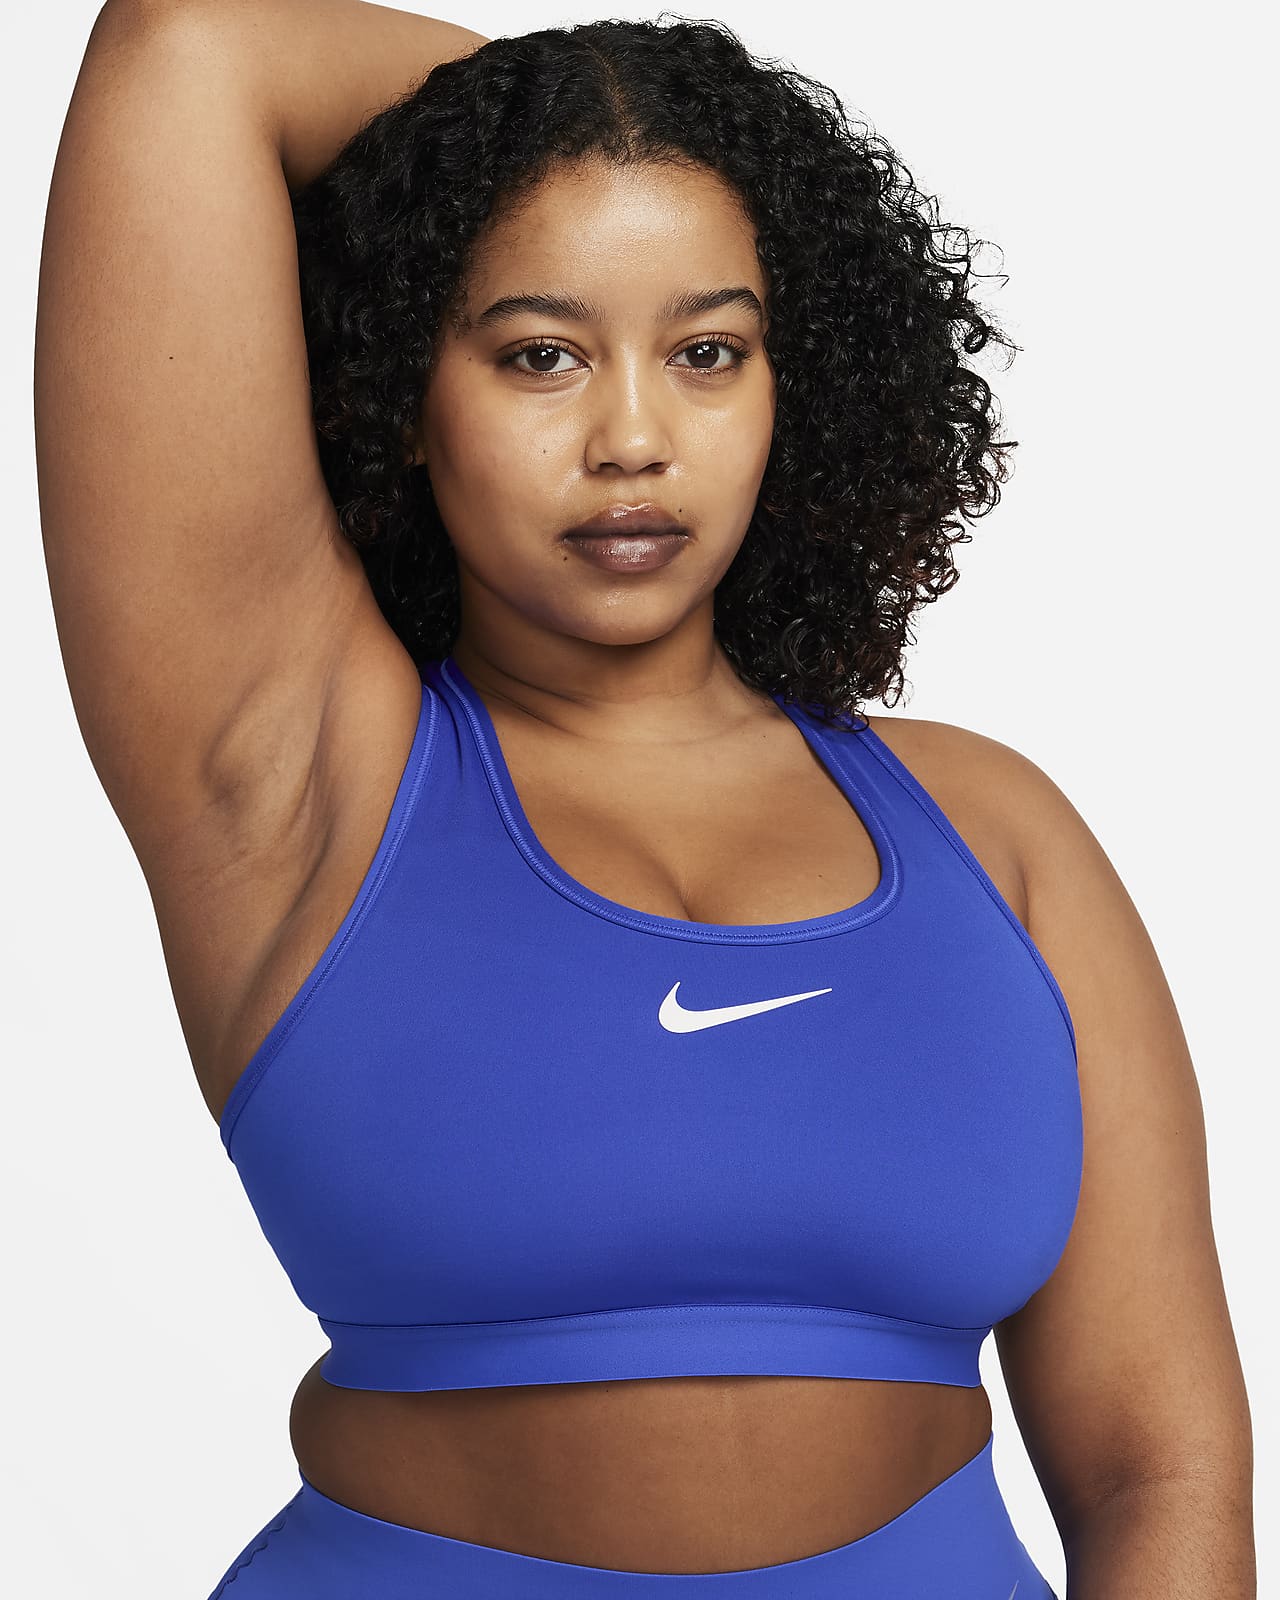 Women Gym Crop Top Sports Crop Tops Girls Fitness Yoga Running Shirt (Color  : Blue, Size : Large)